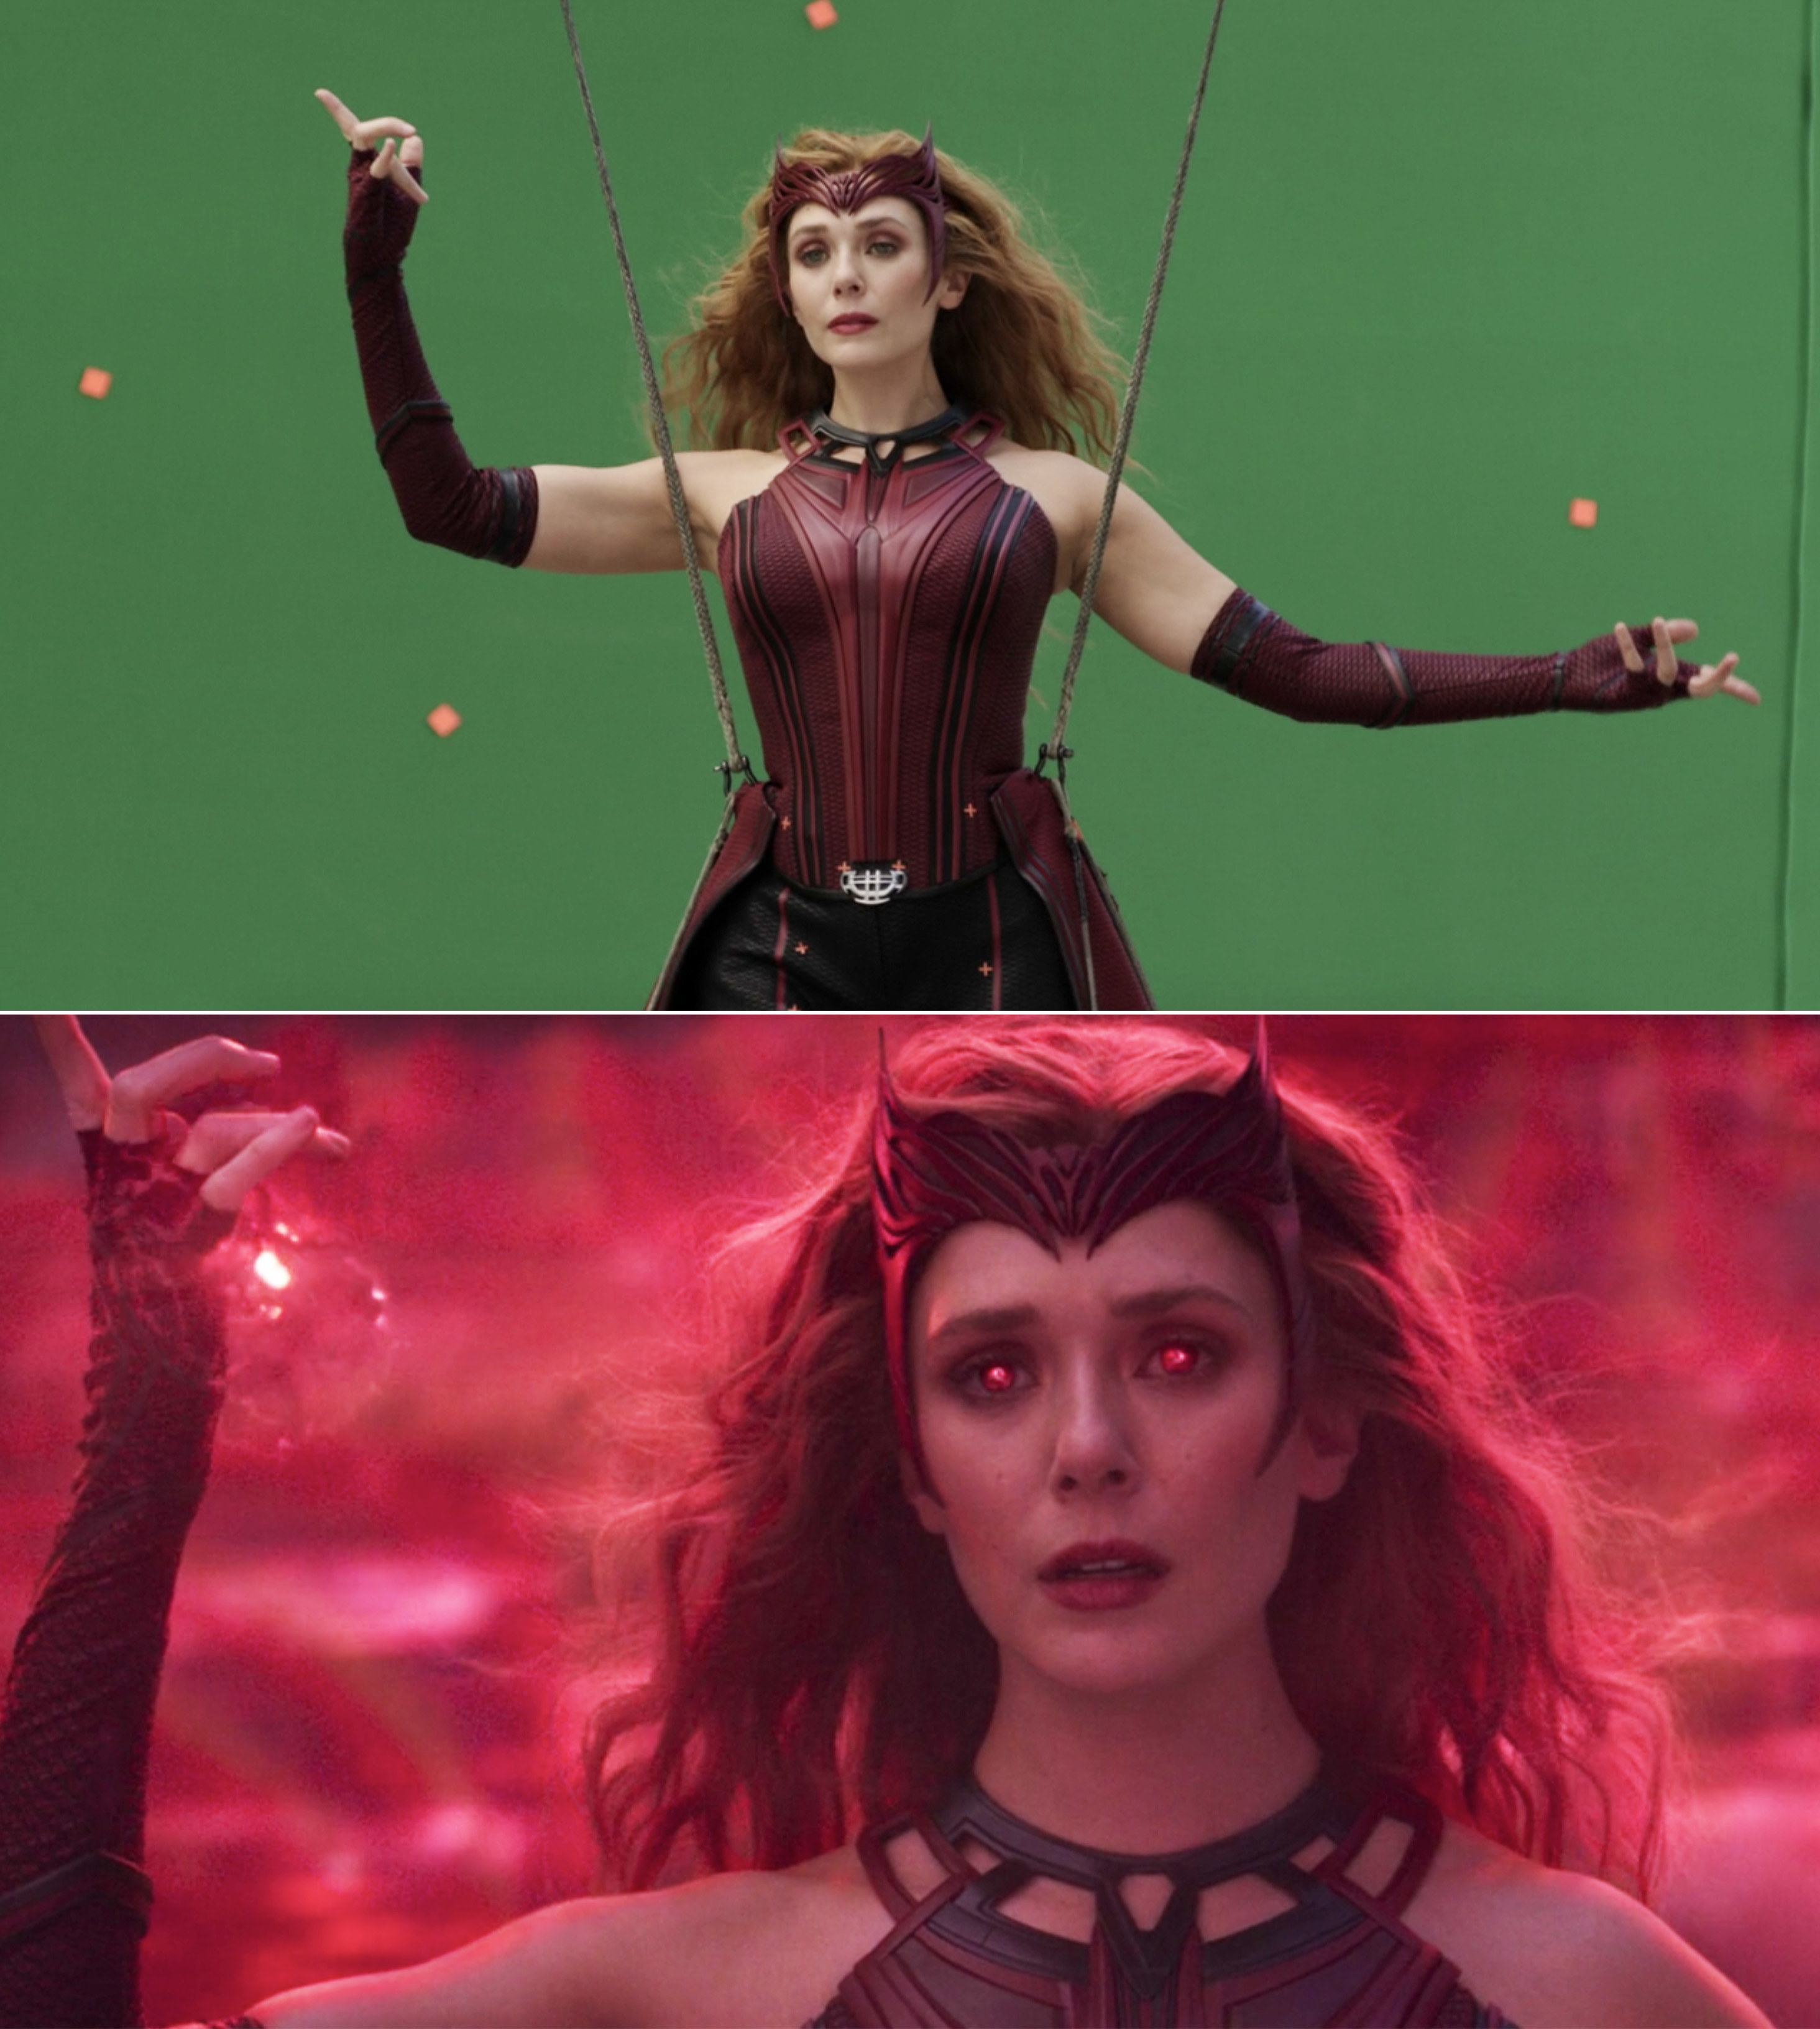 Elizabeth Olsen on a green screen vs the final shot with visual effects